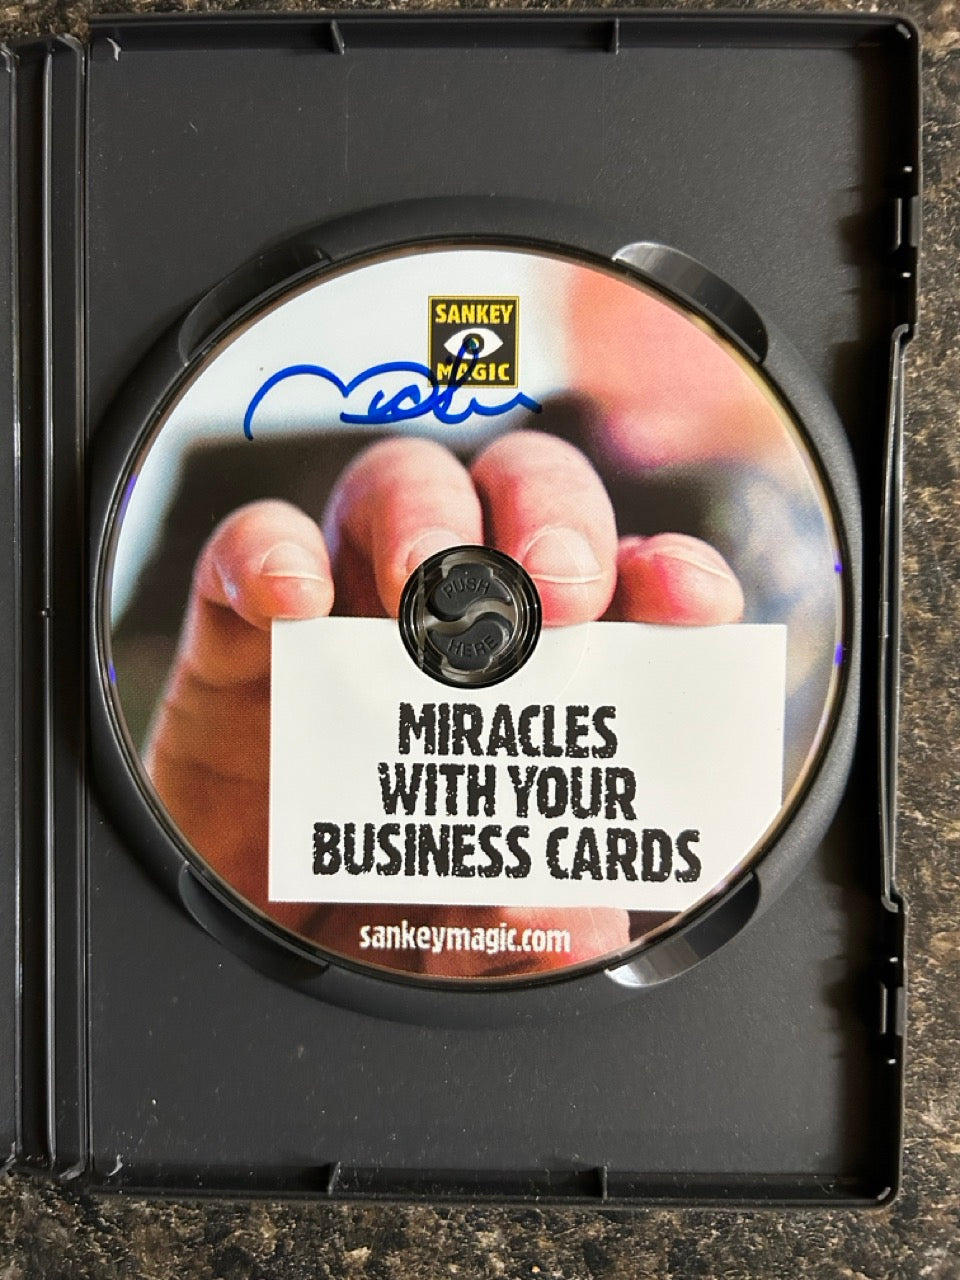 Miracles With Your Business Cards - Jay Sankey - DVD